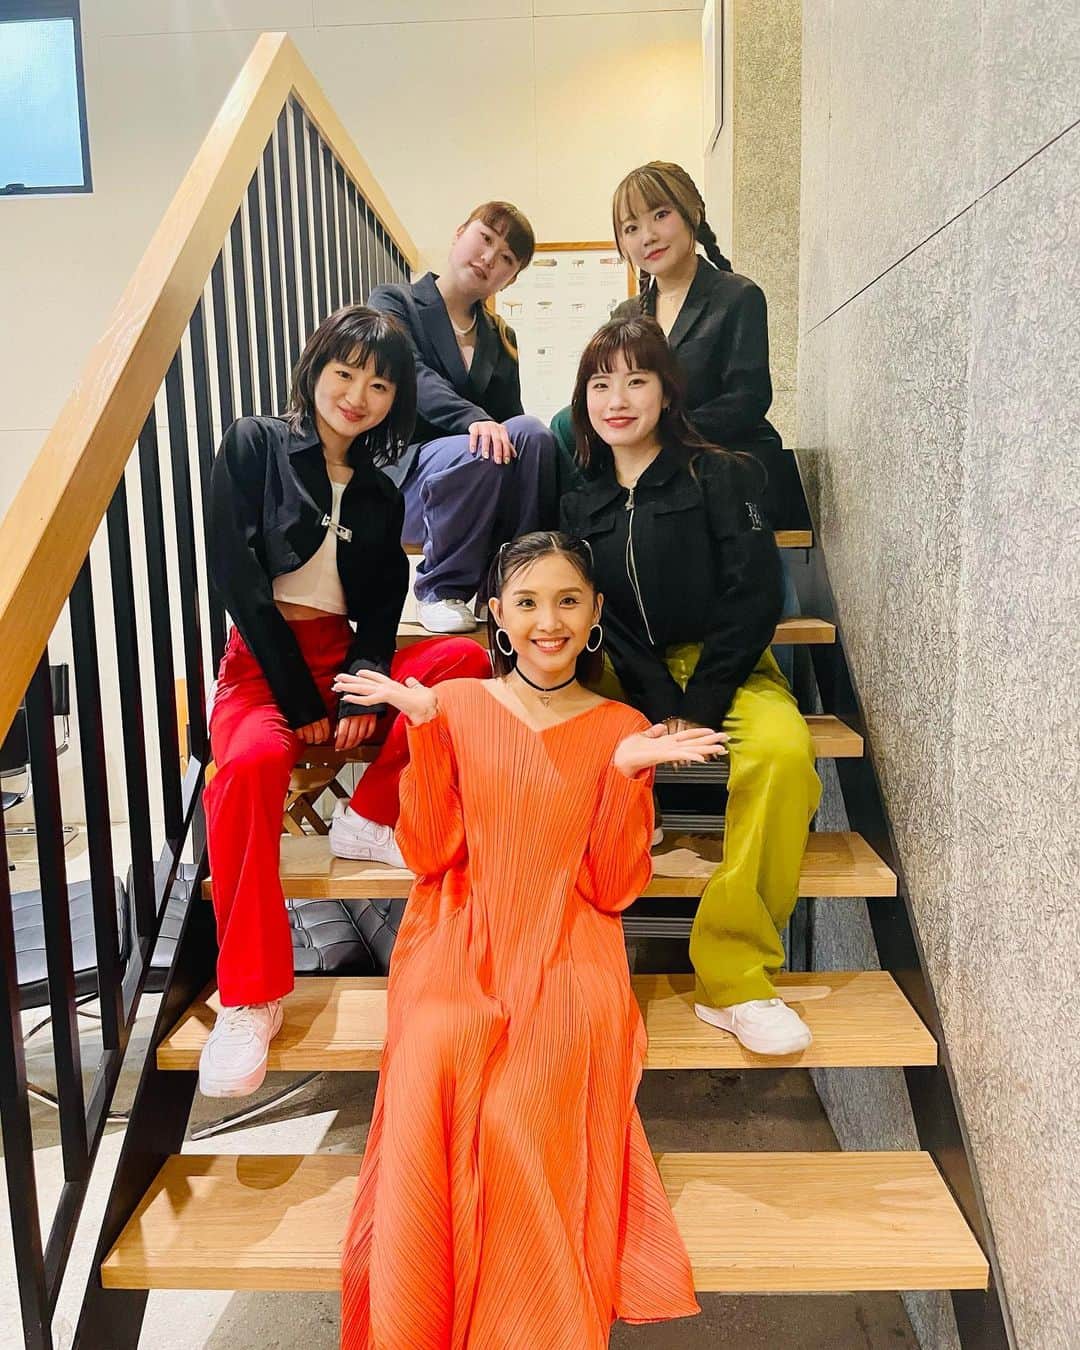 Beverlyのインスタグラム：「「Bumpy」MV のダンサーのみんなと！ Thank you guys! You were all so great! 👊🧡 @rina_takizawa @yurianchimp @kanooo_312 @naho____0122   Of course the one take MV wouldn’t be possible without the amazing @te2ta0501 !! Thank you!!  And also @asami.makeup for always making me feel beautiful with your hair and make up! ✨✨」